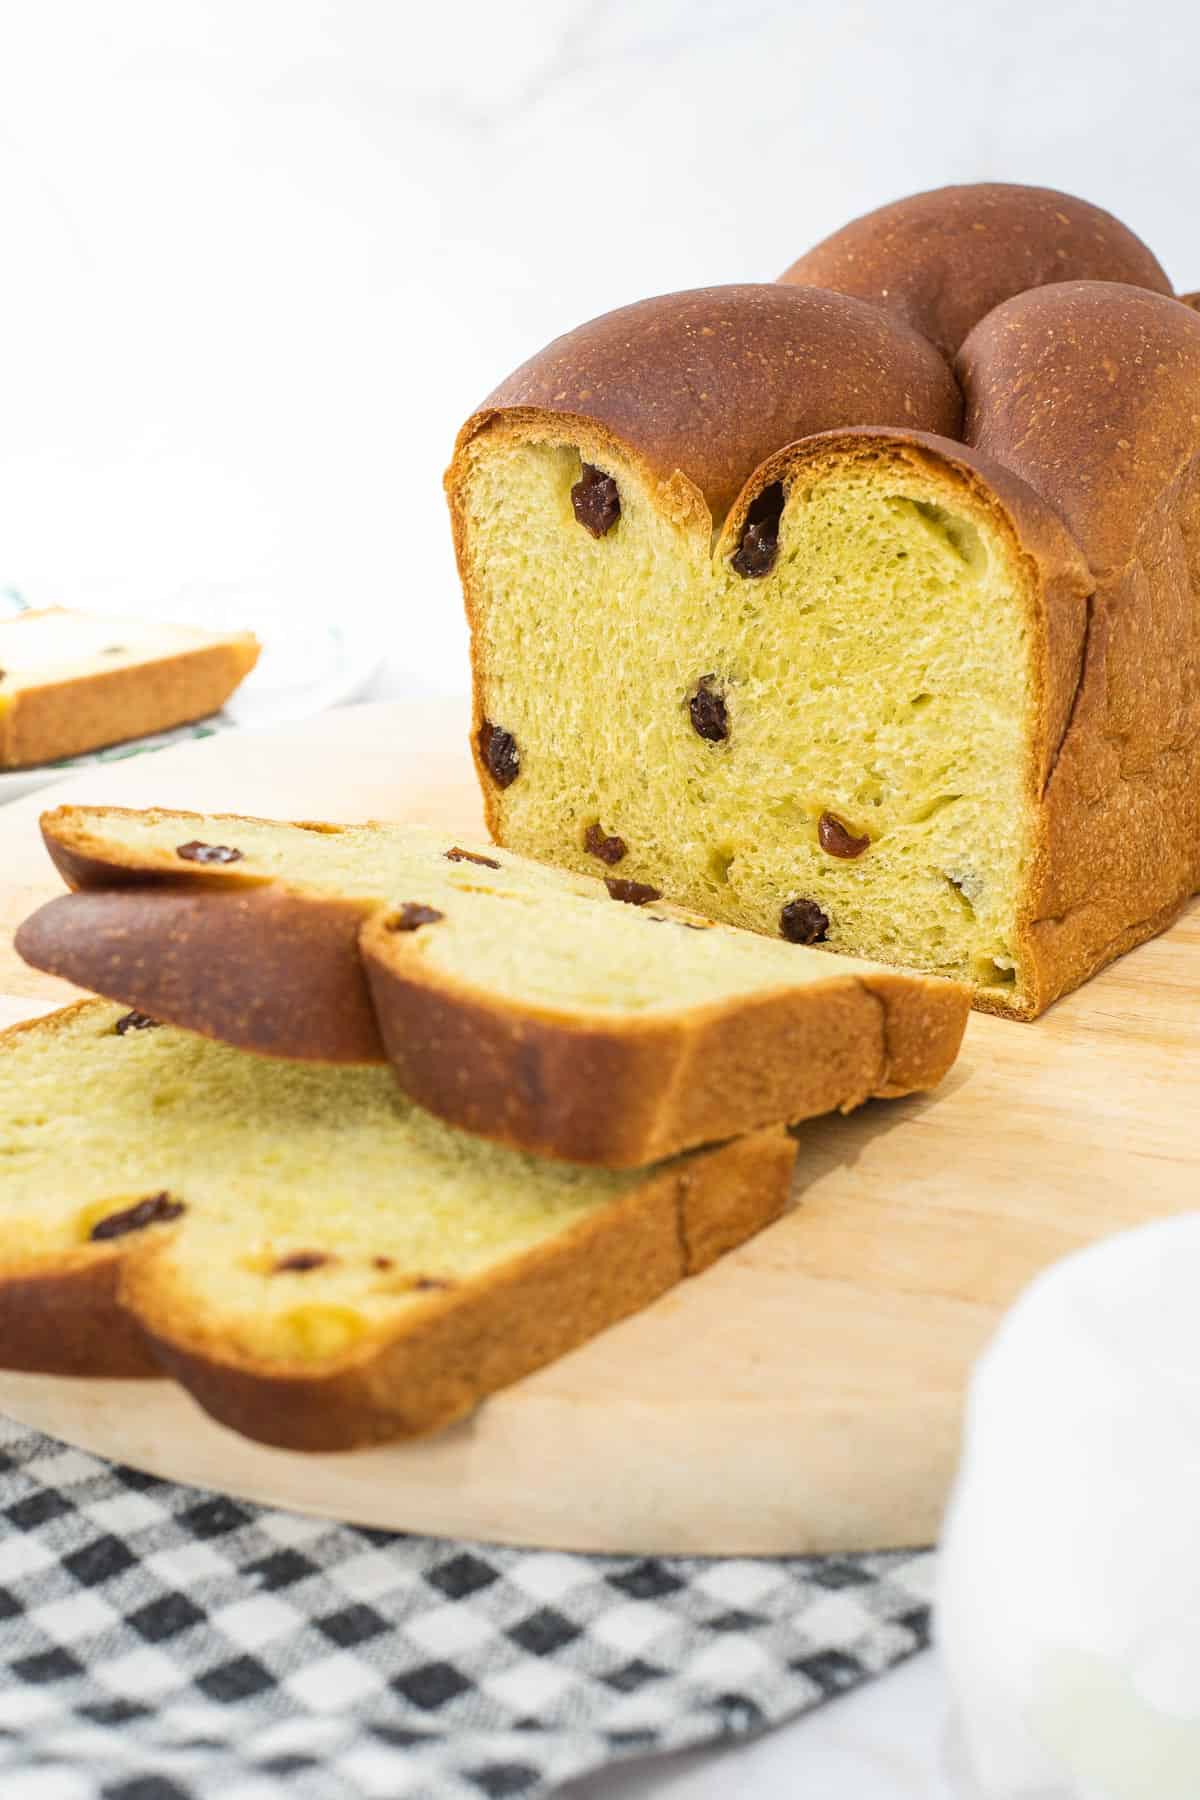 A raisin loaf cut into slices.